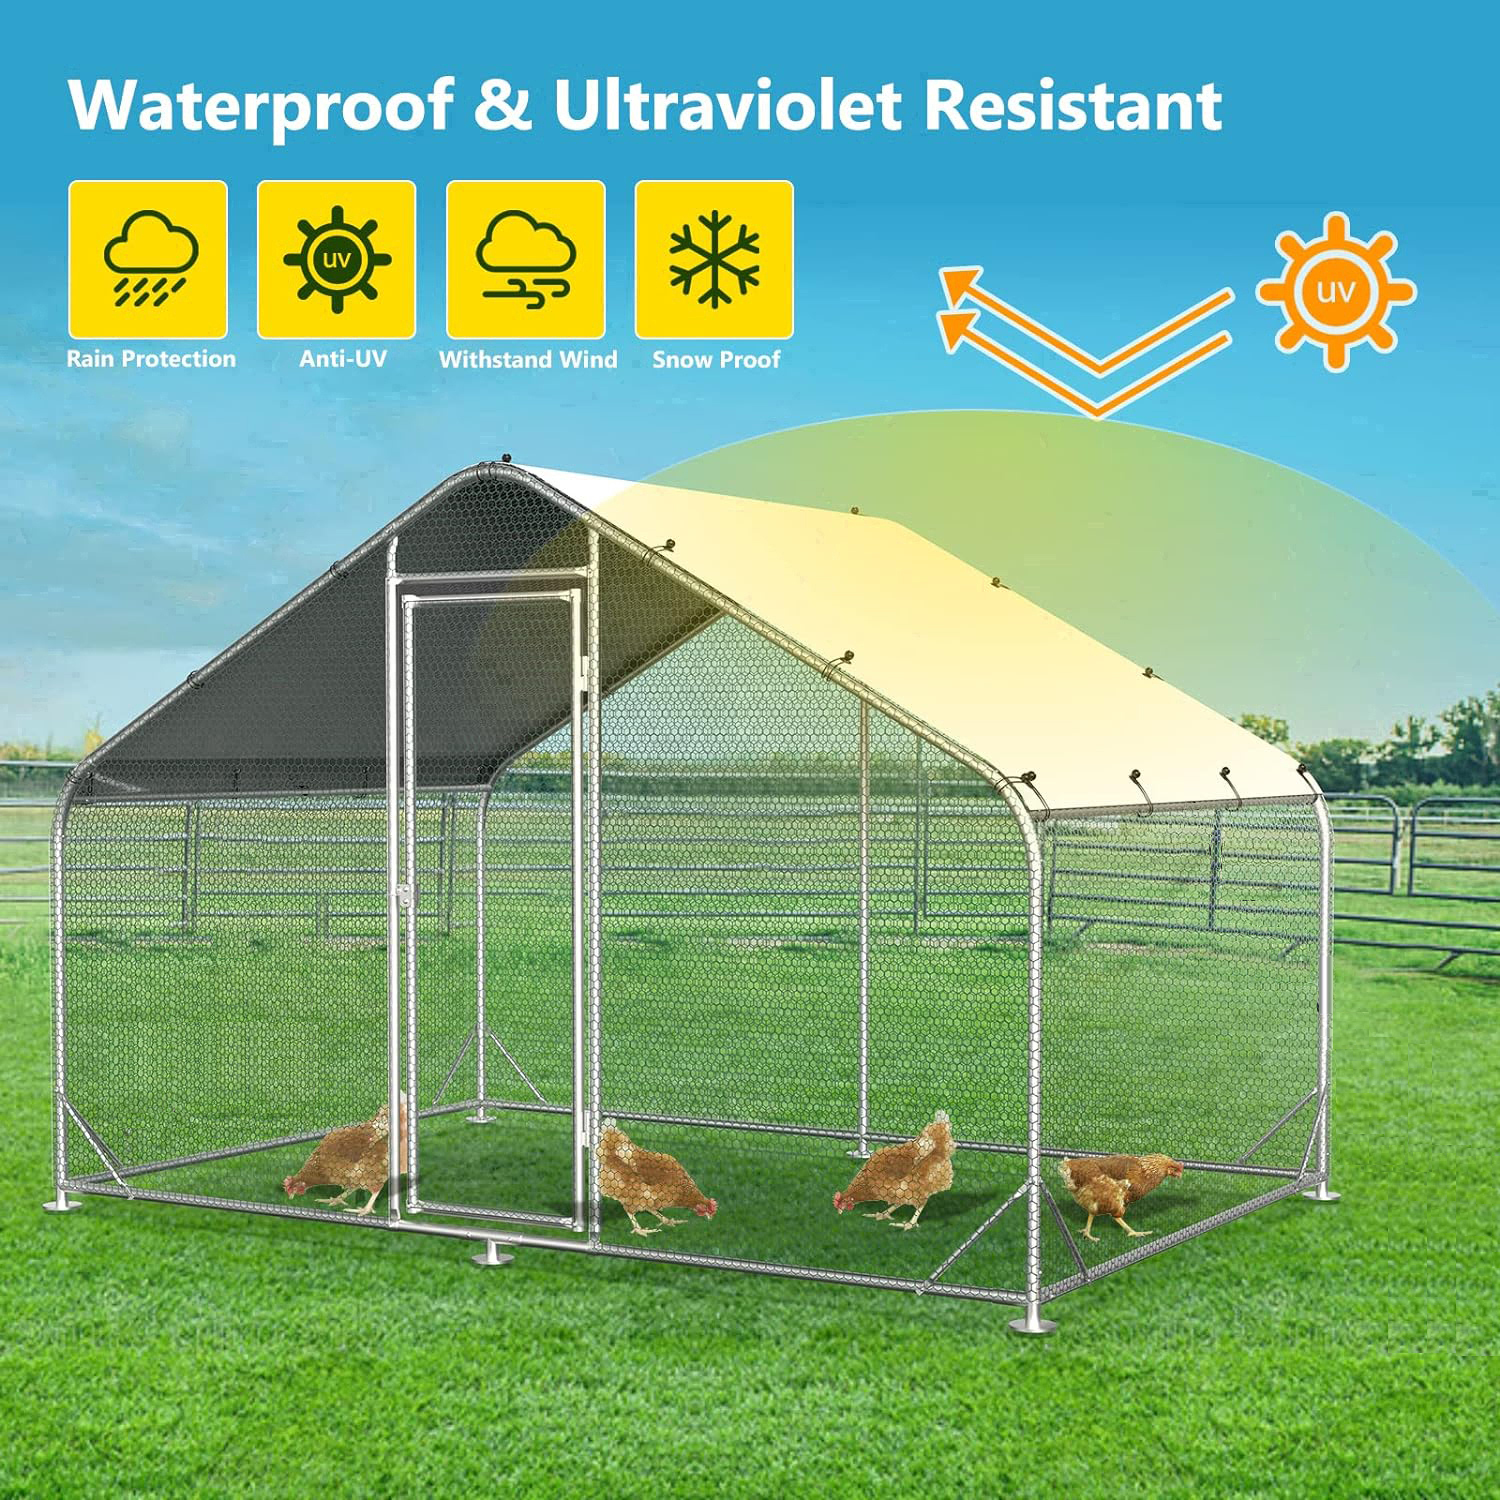 Large Metal Chicken Coops, Outdoor Duck Walk-in Run Poultry Cage, Hen House Yard Habitat Cage with Waterproof Cover Spire Shaped Coop, 9.8' L x 6.6' W x 6.6' H - image 4 of 4